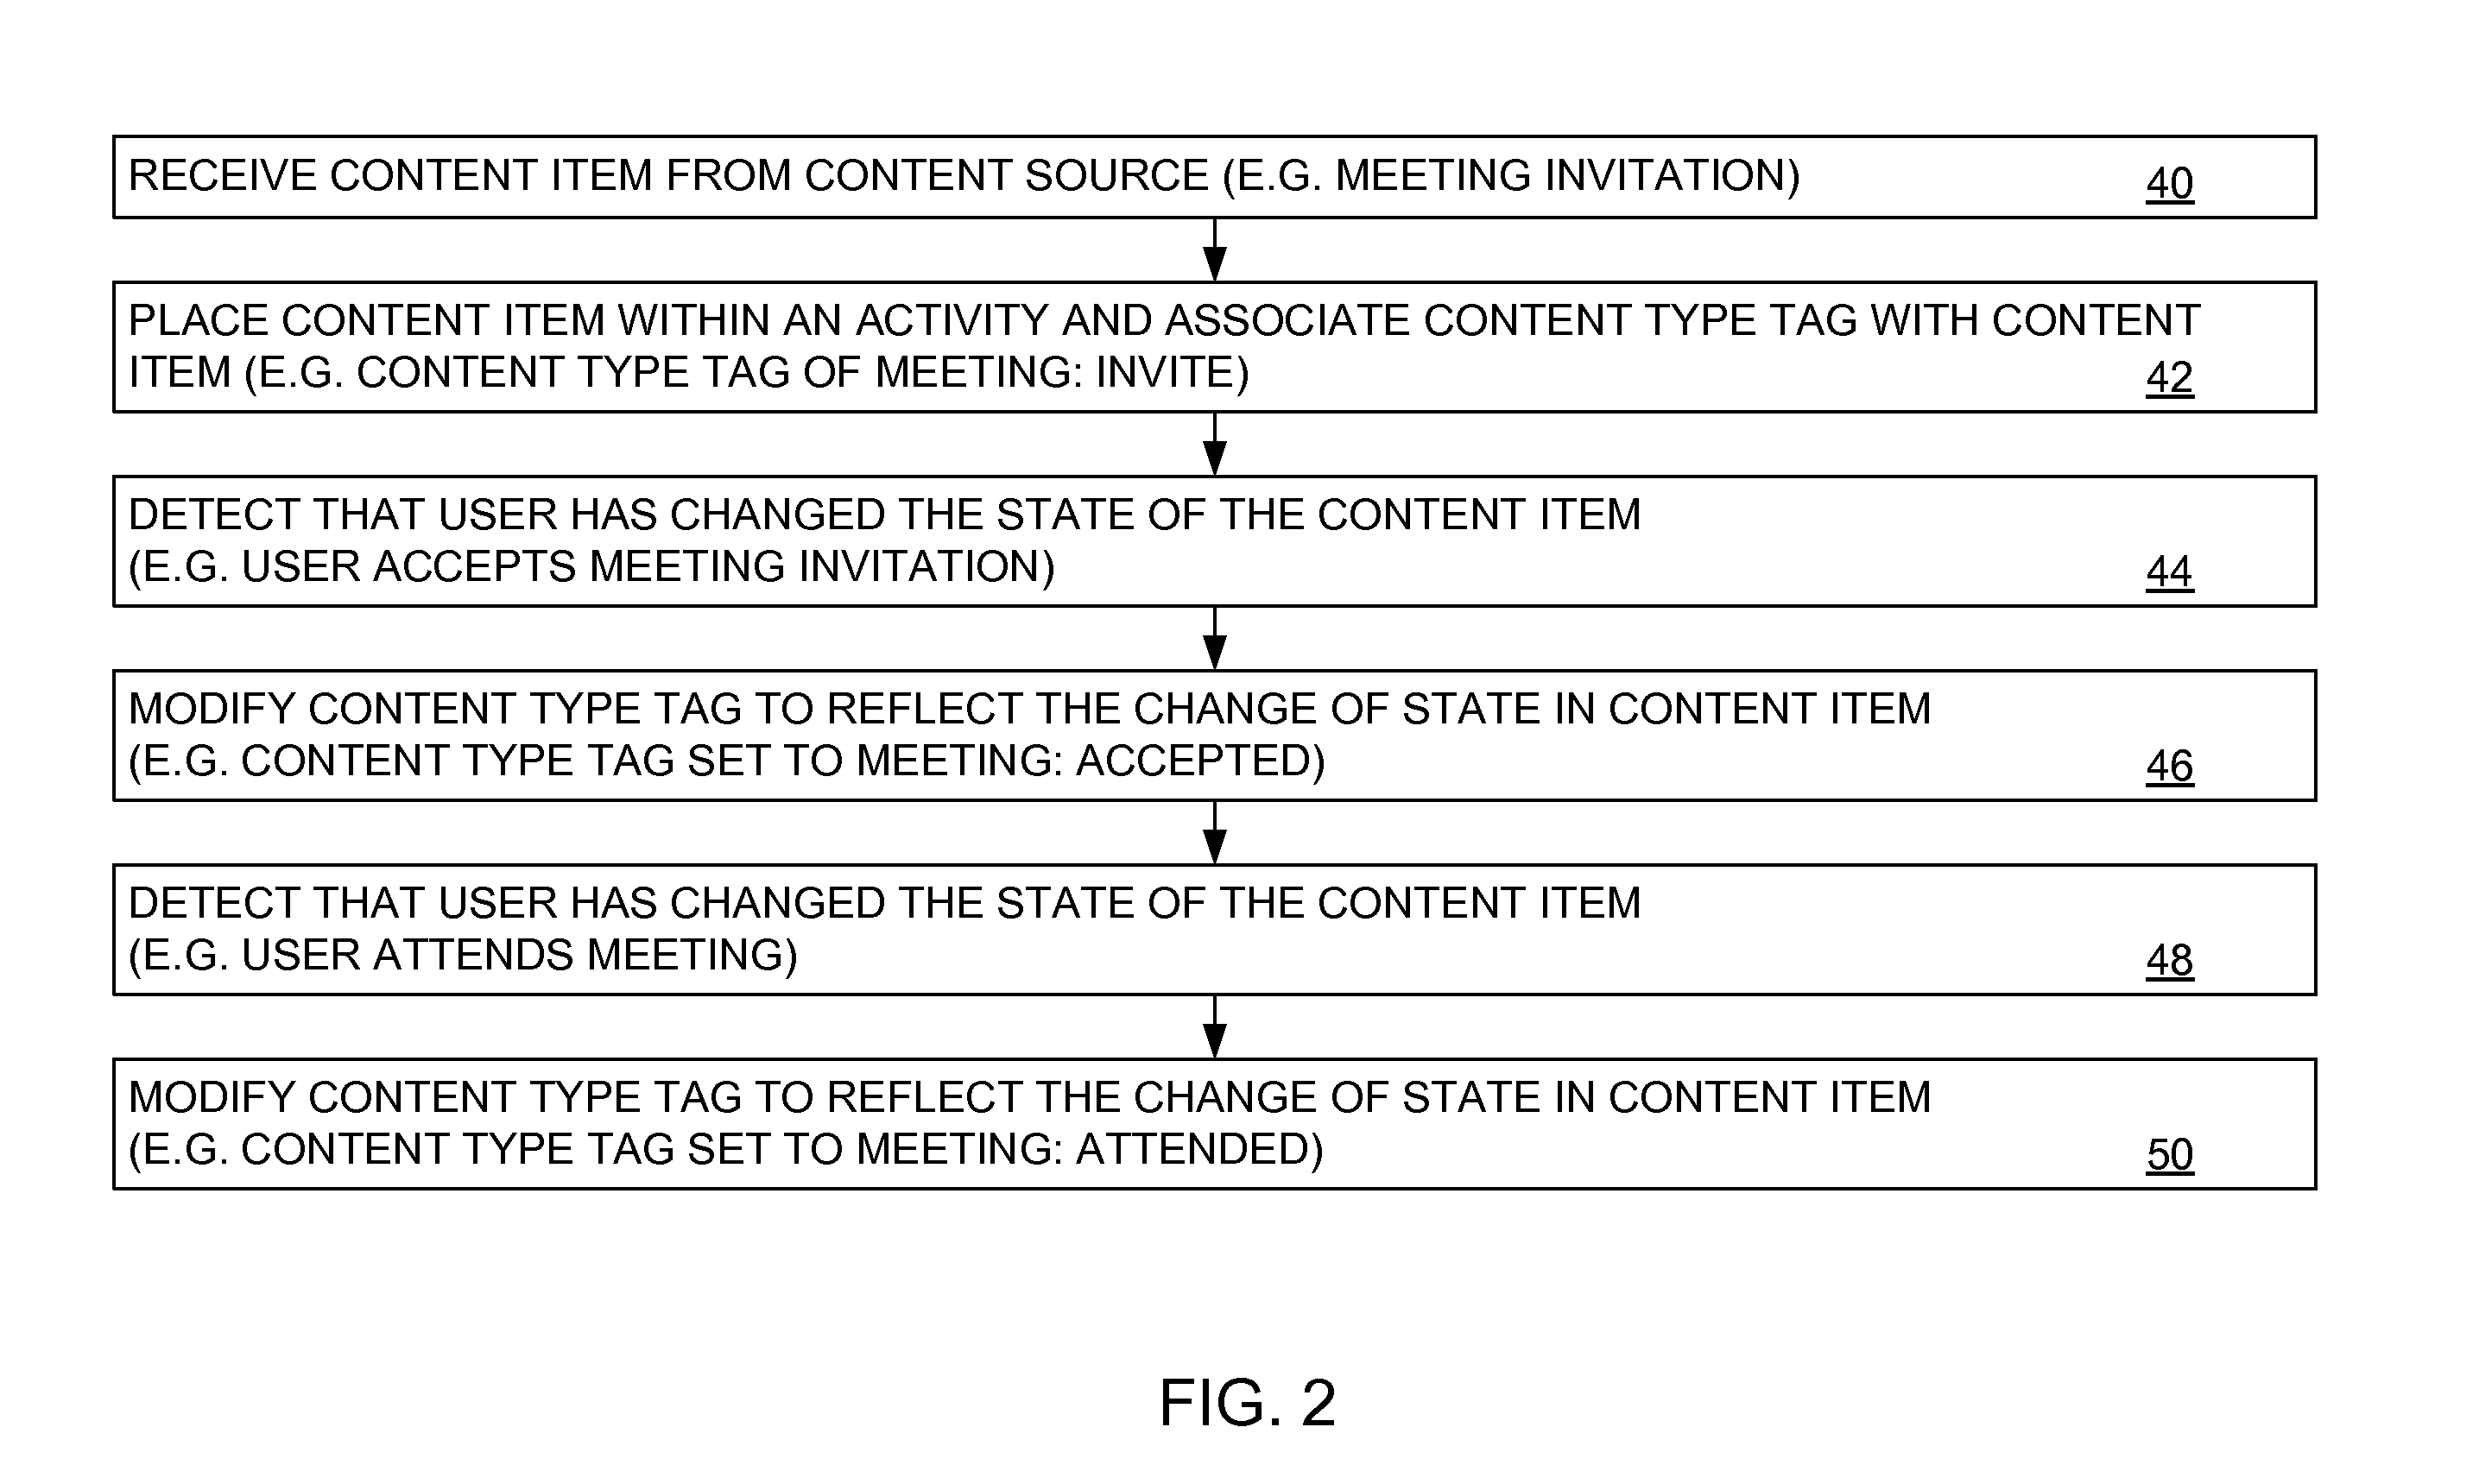 Method and system for automatic generation and updating of tags based on type of communication and content state in an activities oriented collaboration tool